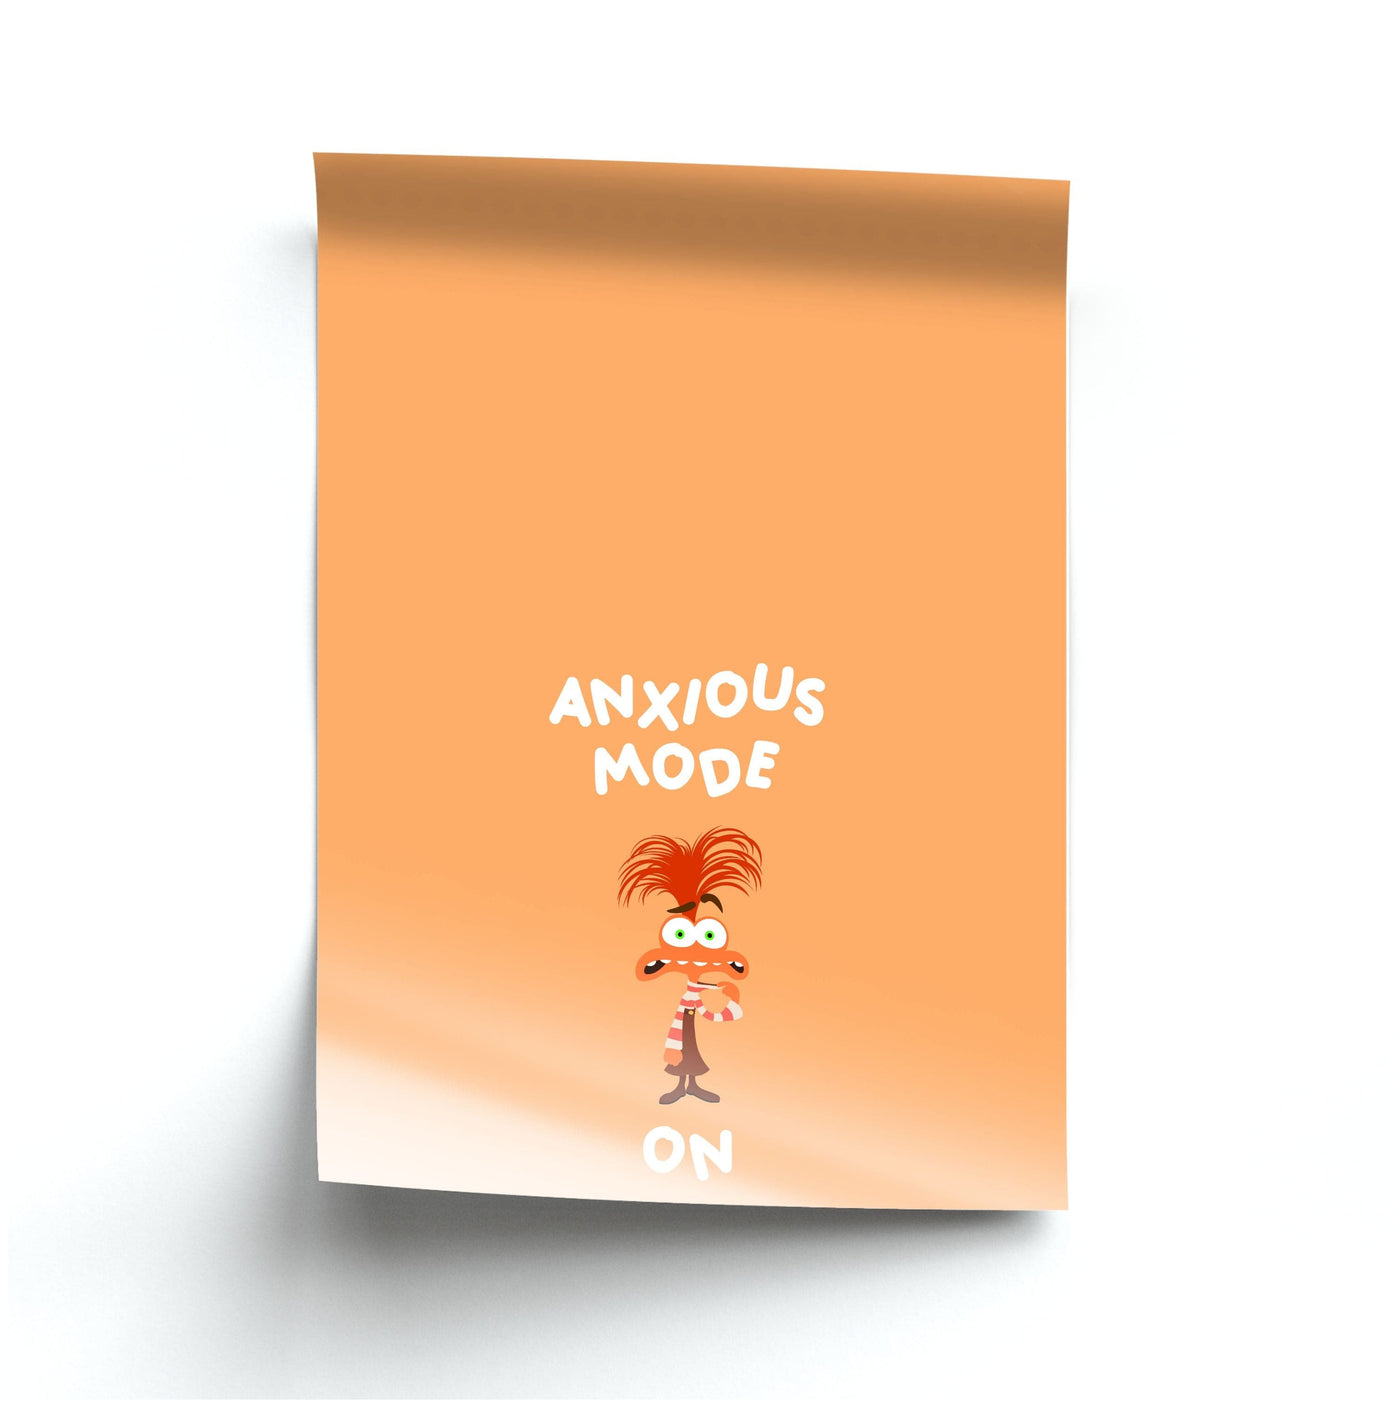 Anxious Mode On - Inside Out Poster